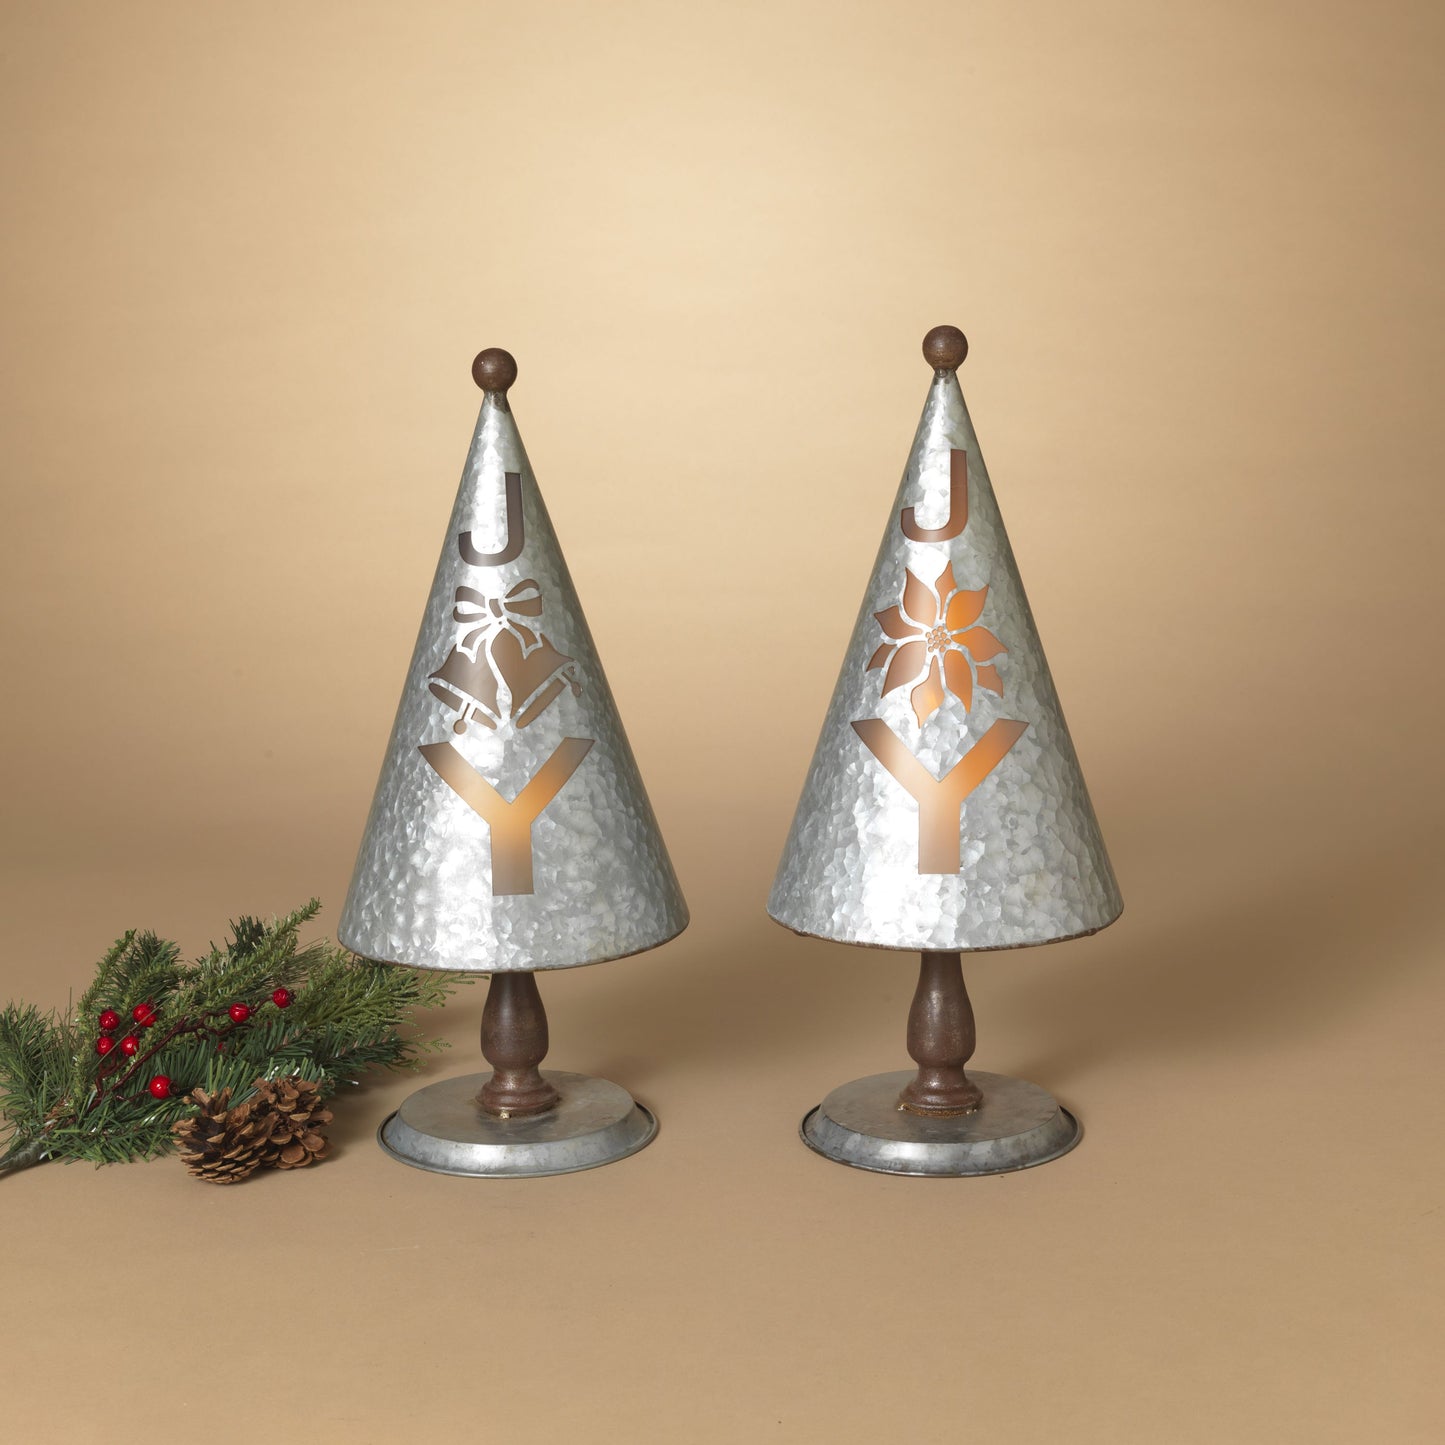 Gerson Company 17.9"H Metal Holiday Tree W/ Candleholder, 2 Asst